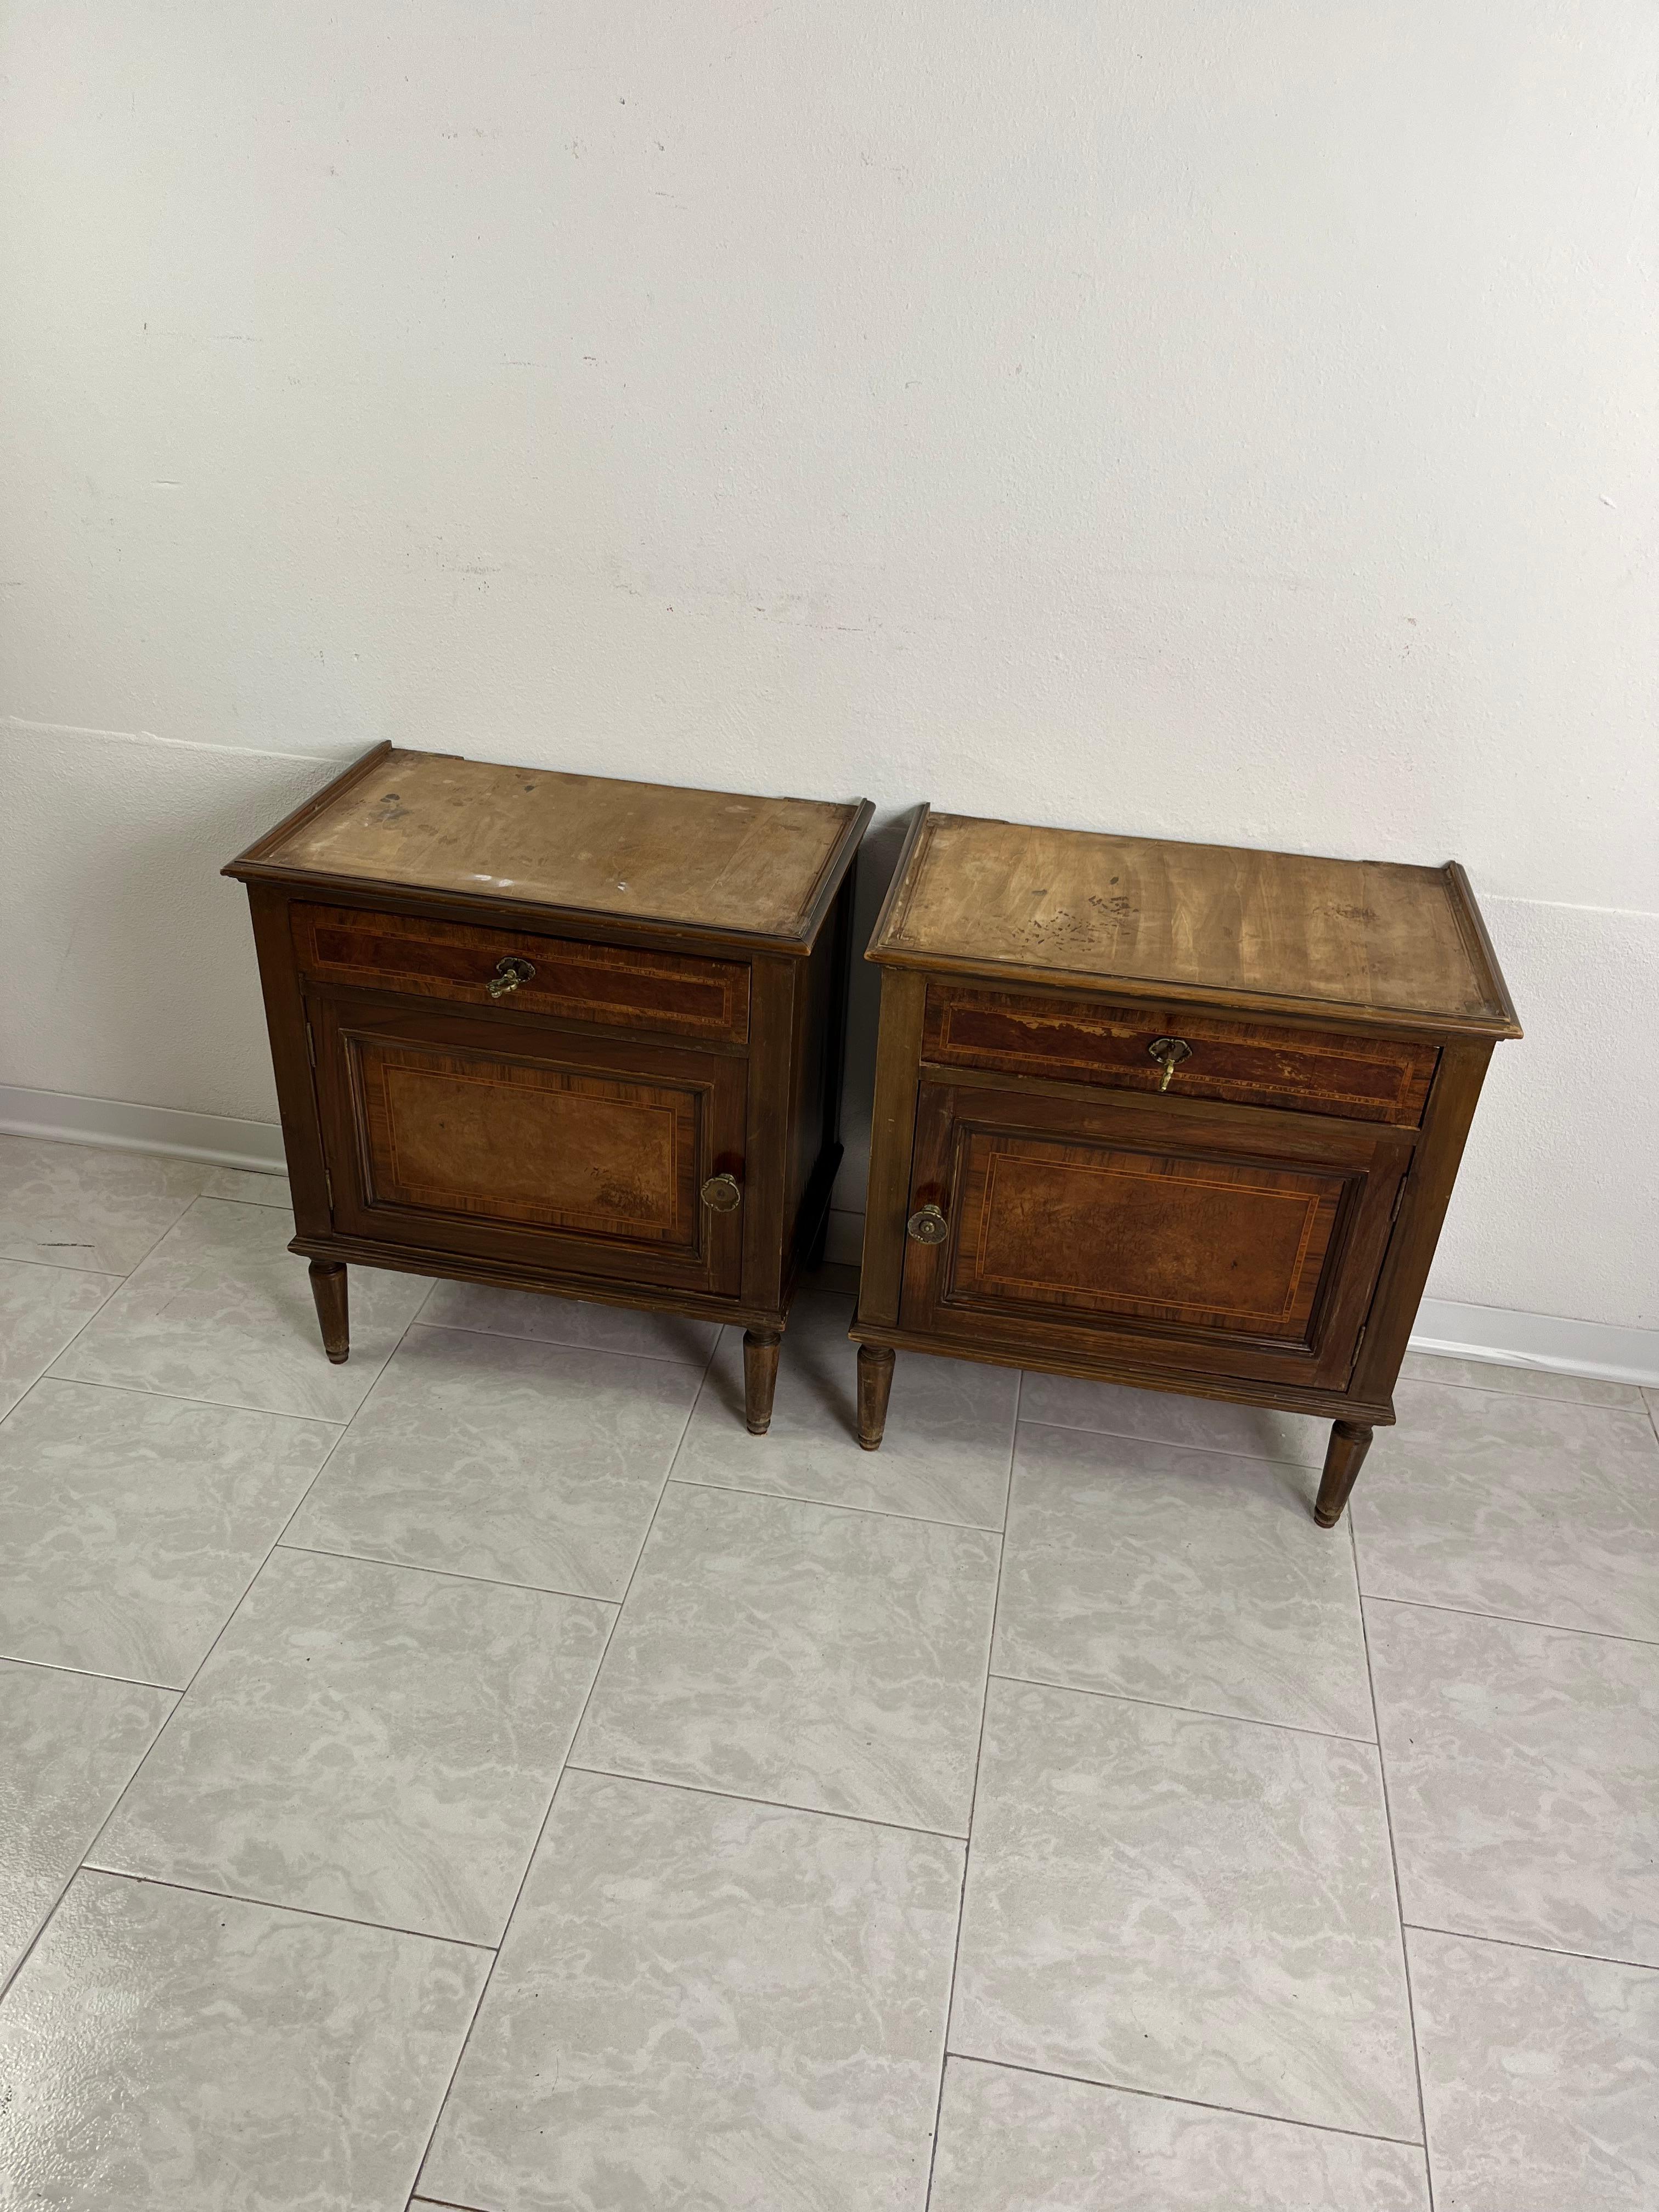 Set of 2 Mid-Century Italian Bedside Tables in Wood and Fine Marble Top 1960s For Sale 3